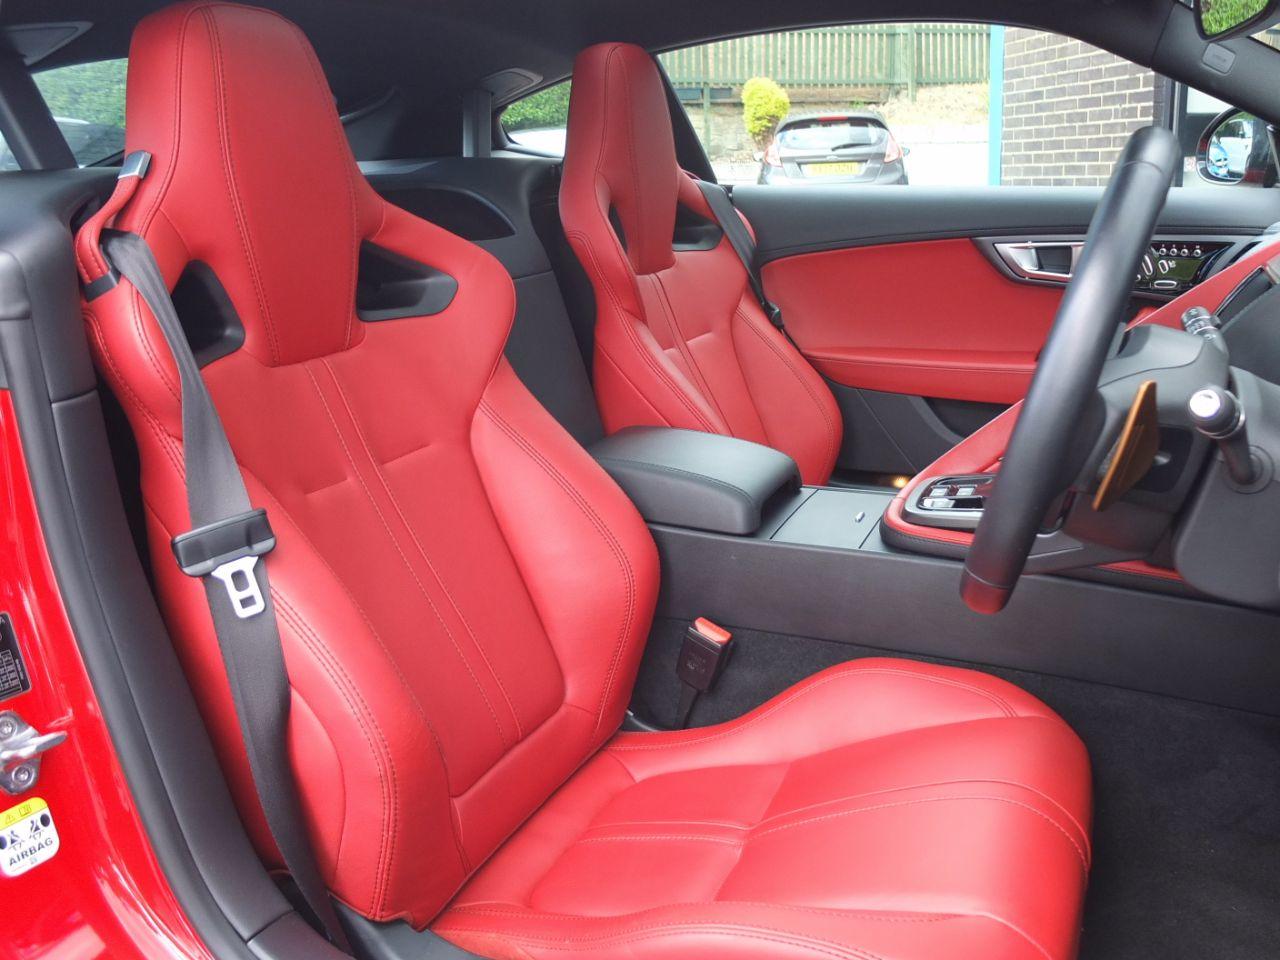 Jaguar F-Type 3.0 Supercharged V6 S Auto 380ps Coupe Petrol Caldera Red